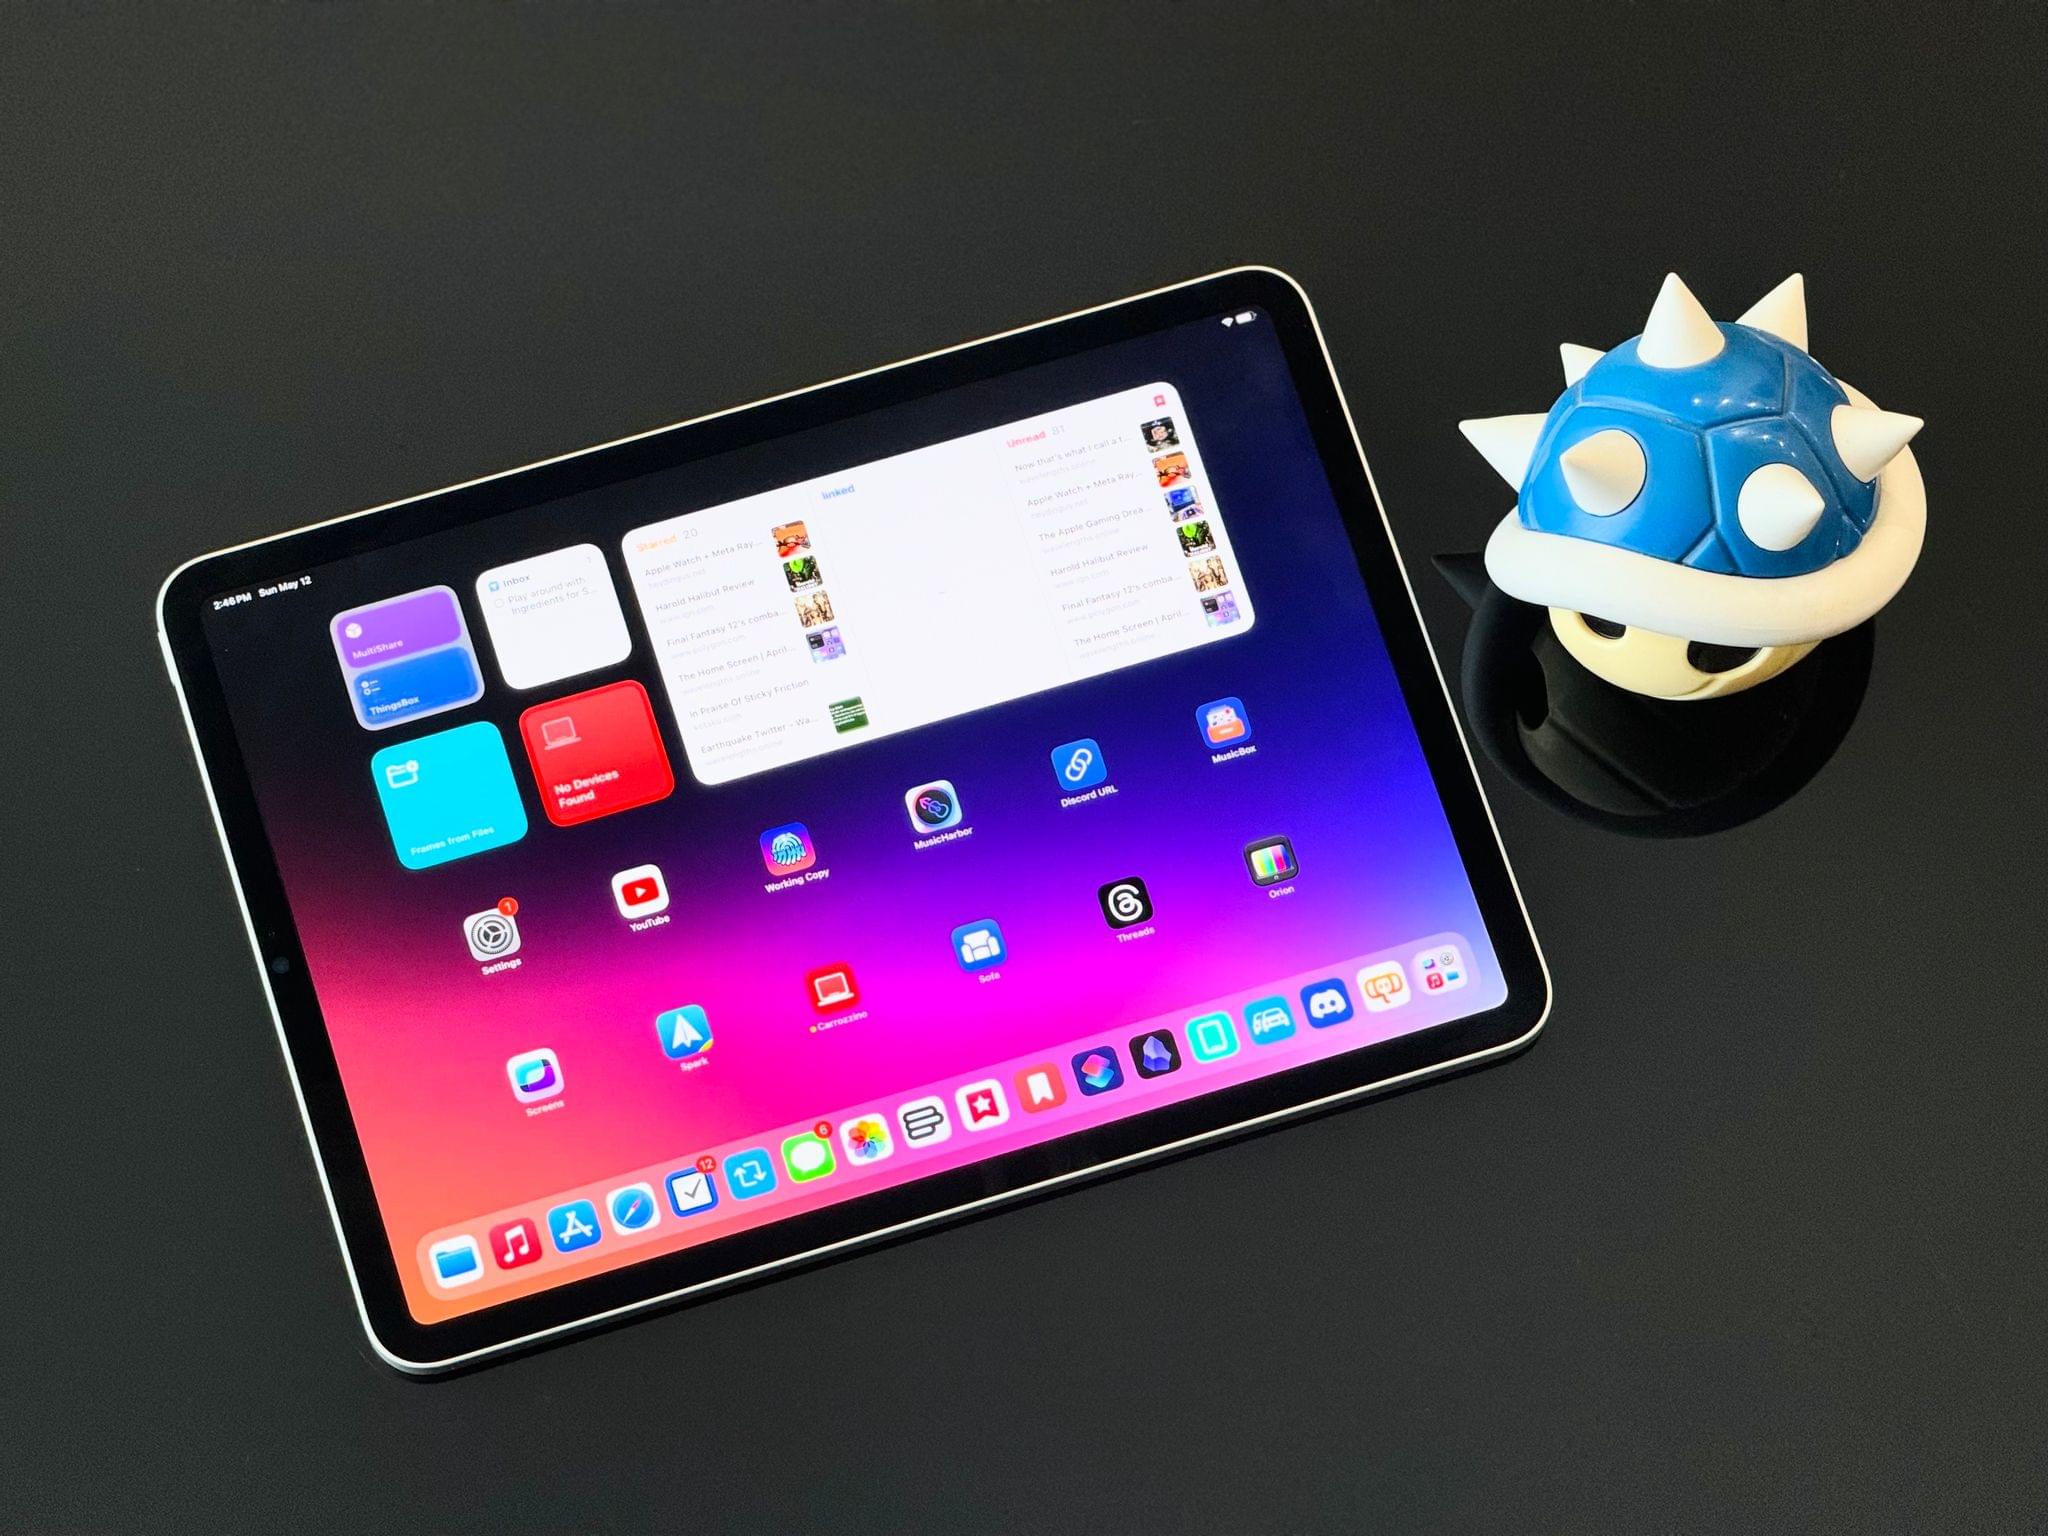 Not an iPad Pro Review: Why iPadOS Still Doesn’t Get the Basics Right